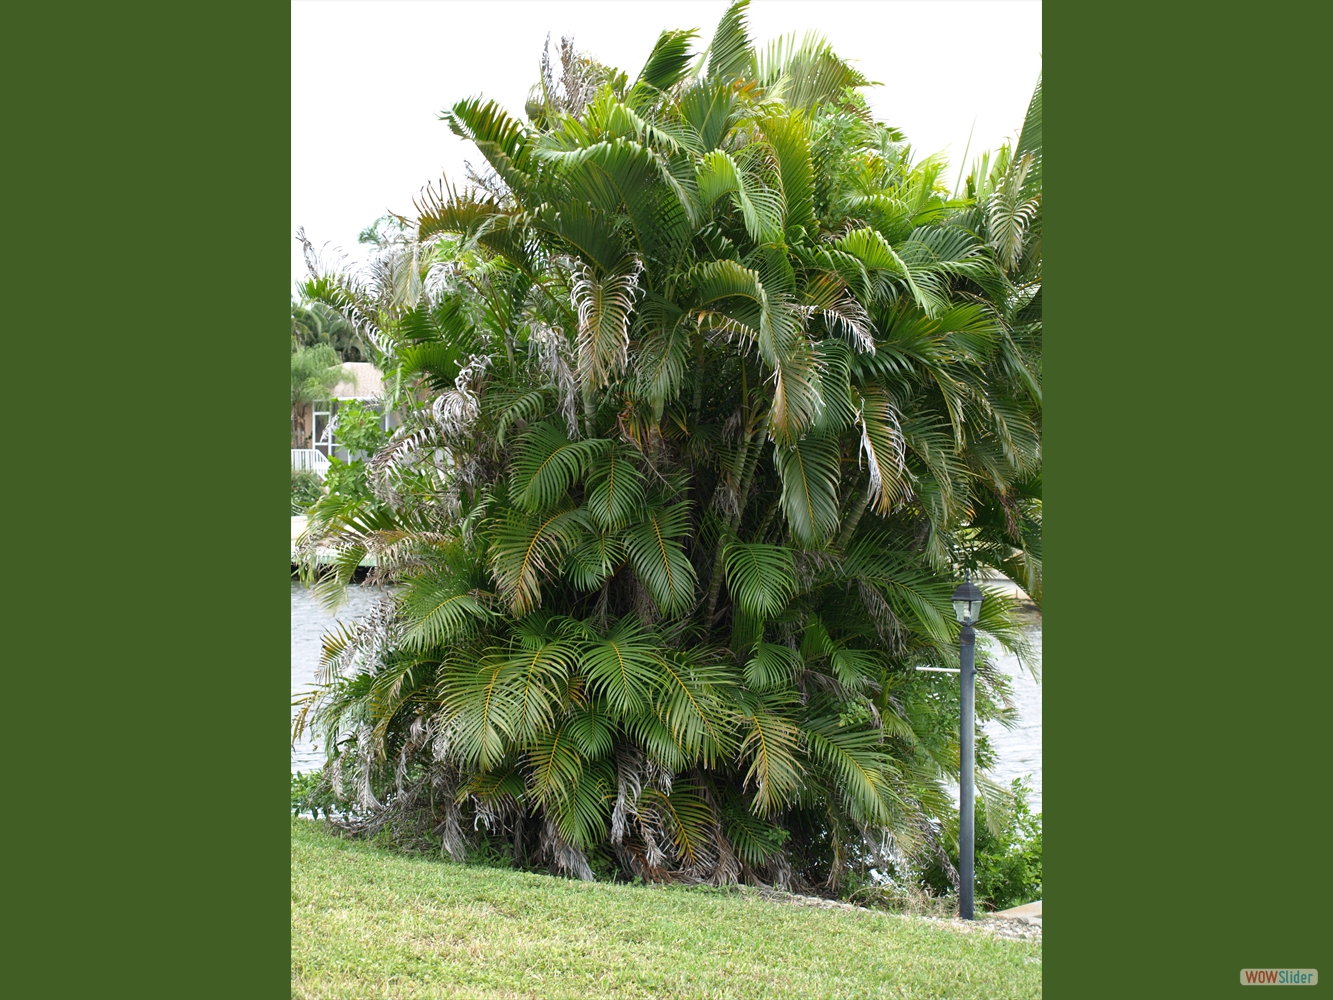 One of the palm bushes ...